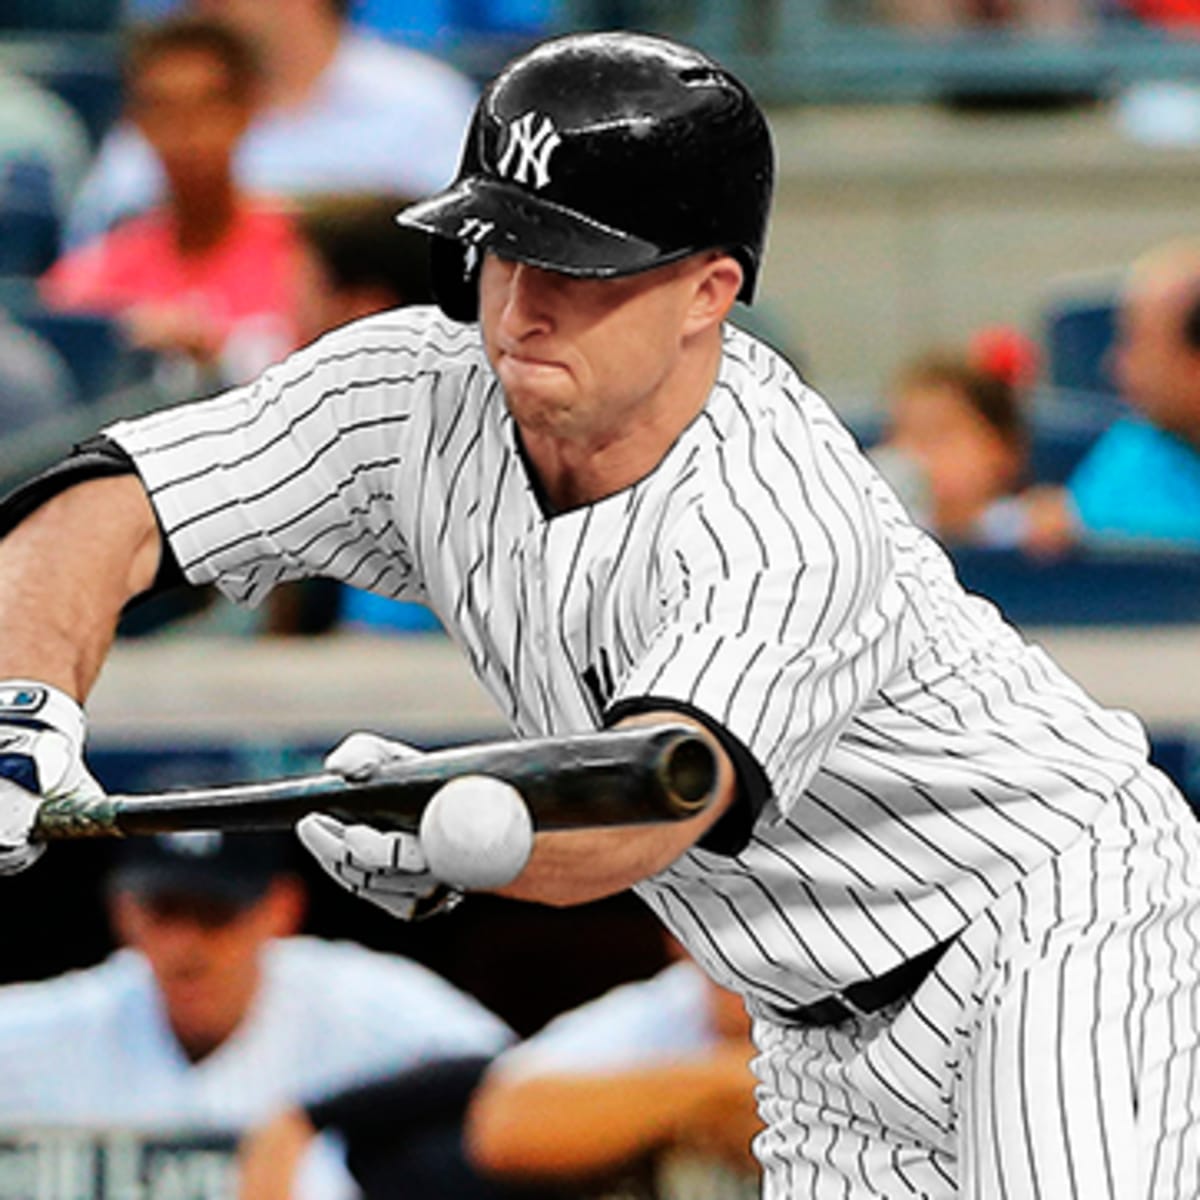 Brett Gardner needed stitches after hitting himself in the face